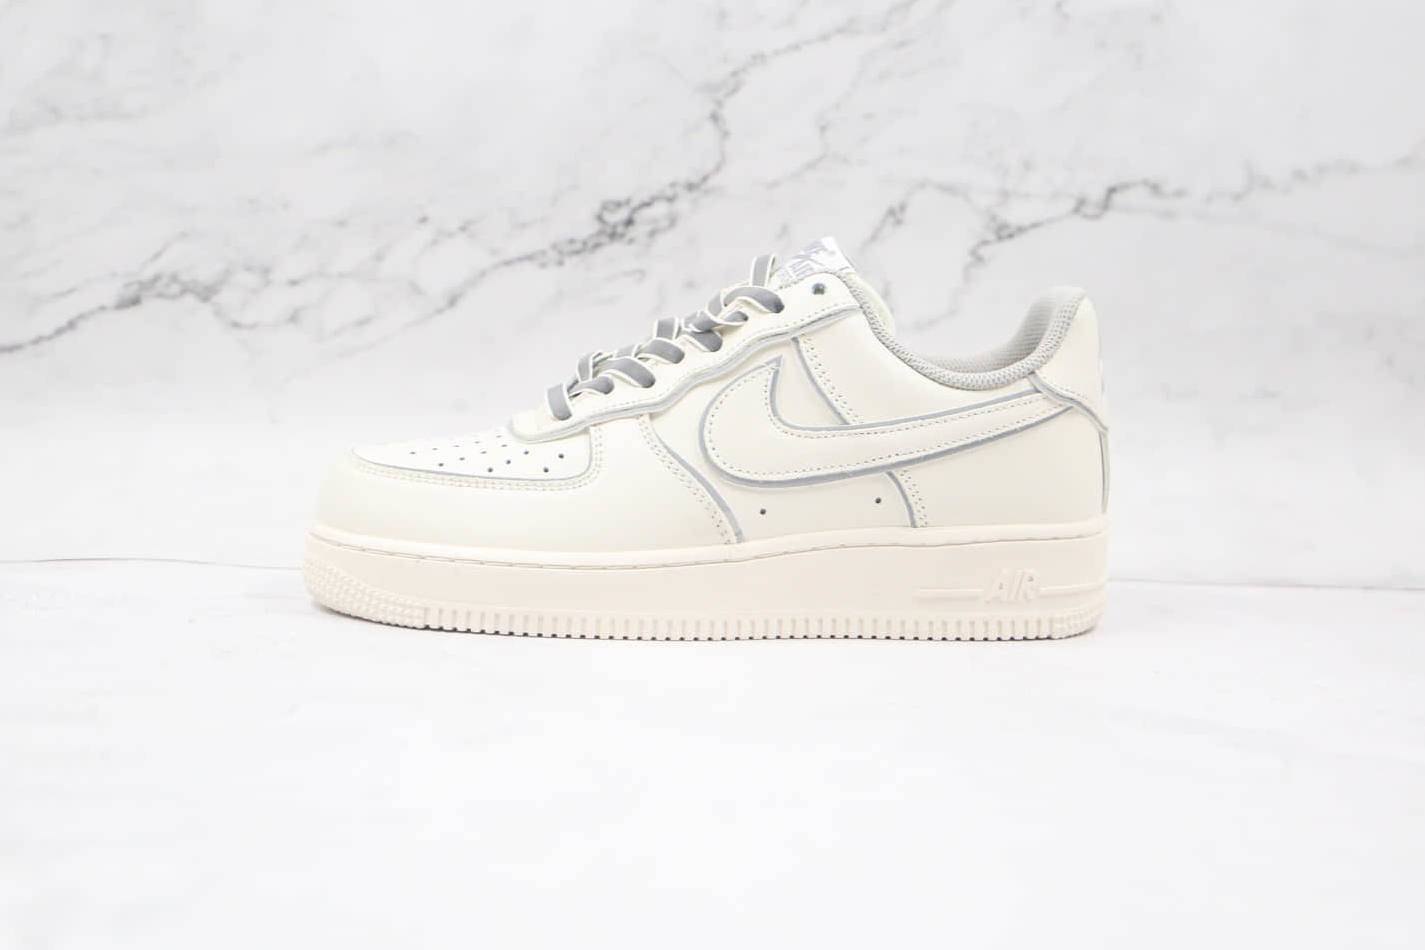 Nike Air Force 1 Low Supreme Beige Silver Reflective - BD3654-506, Limited Edition